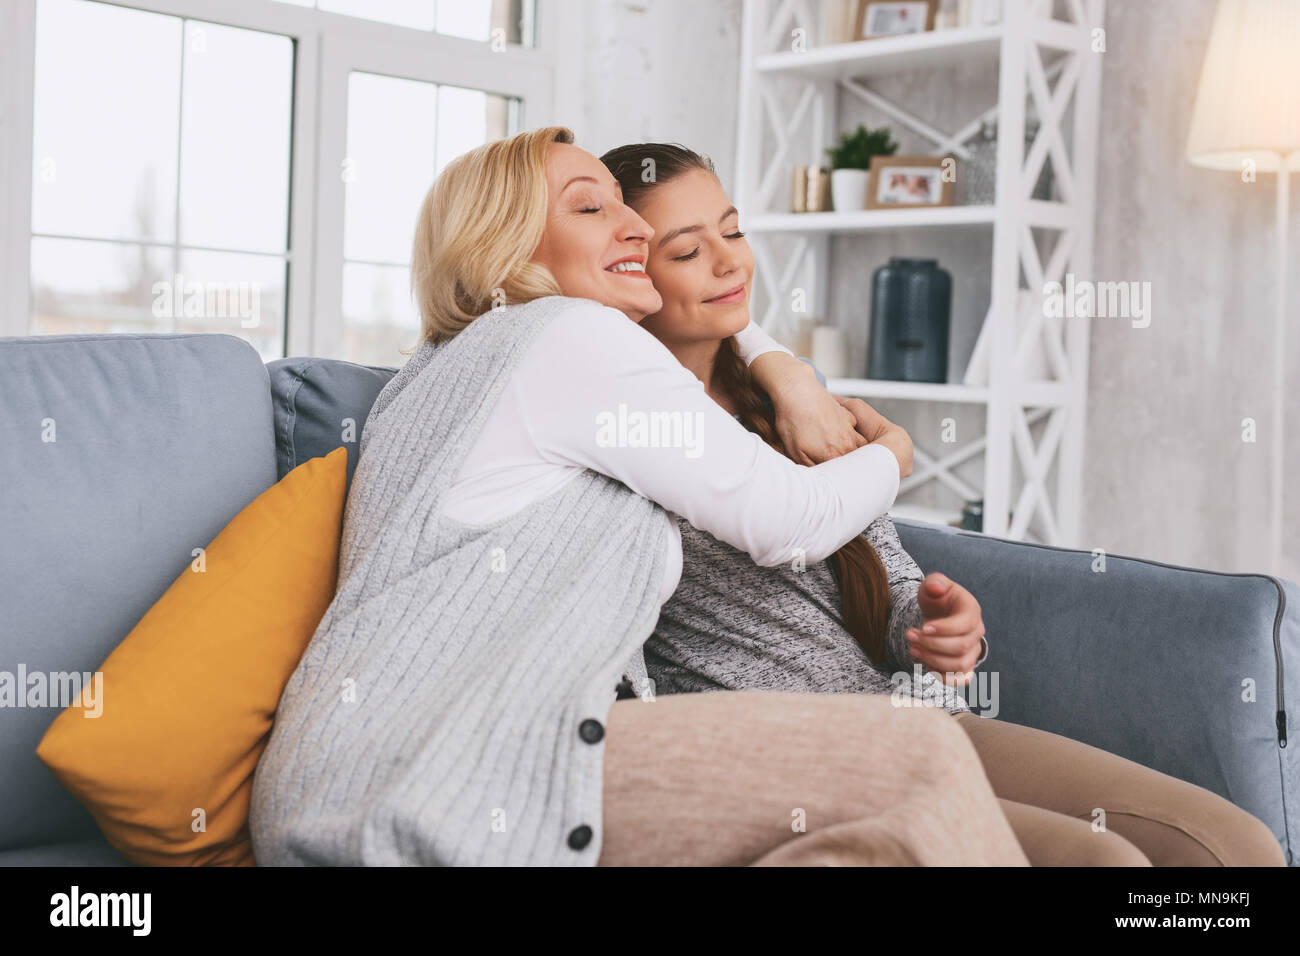 Pleased blonde embracing her daughter Stock Photo